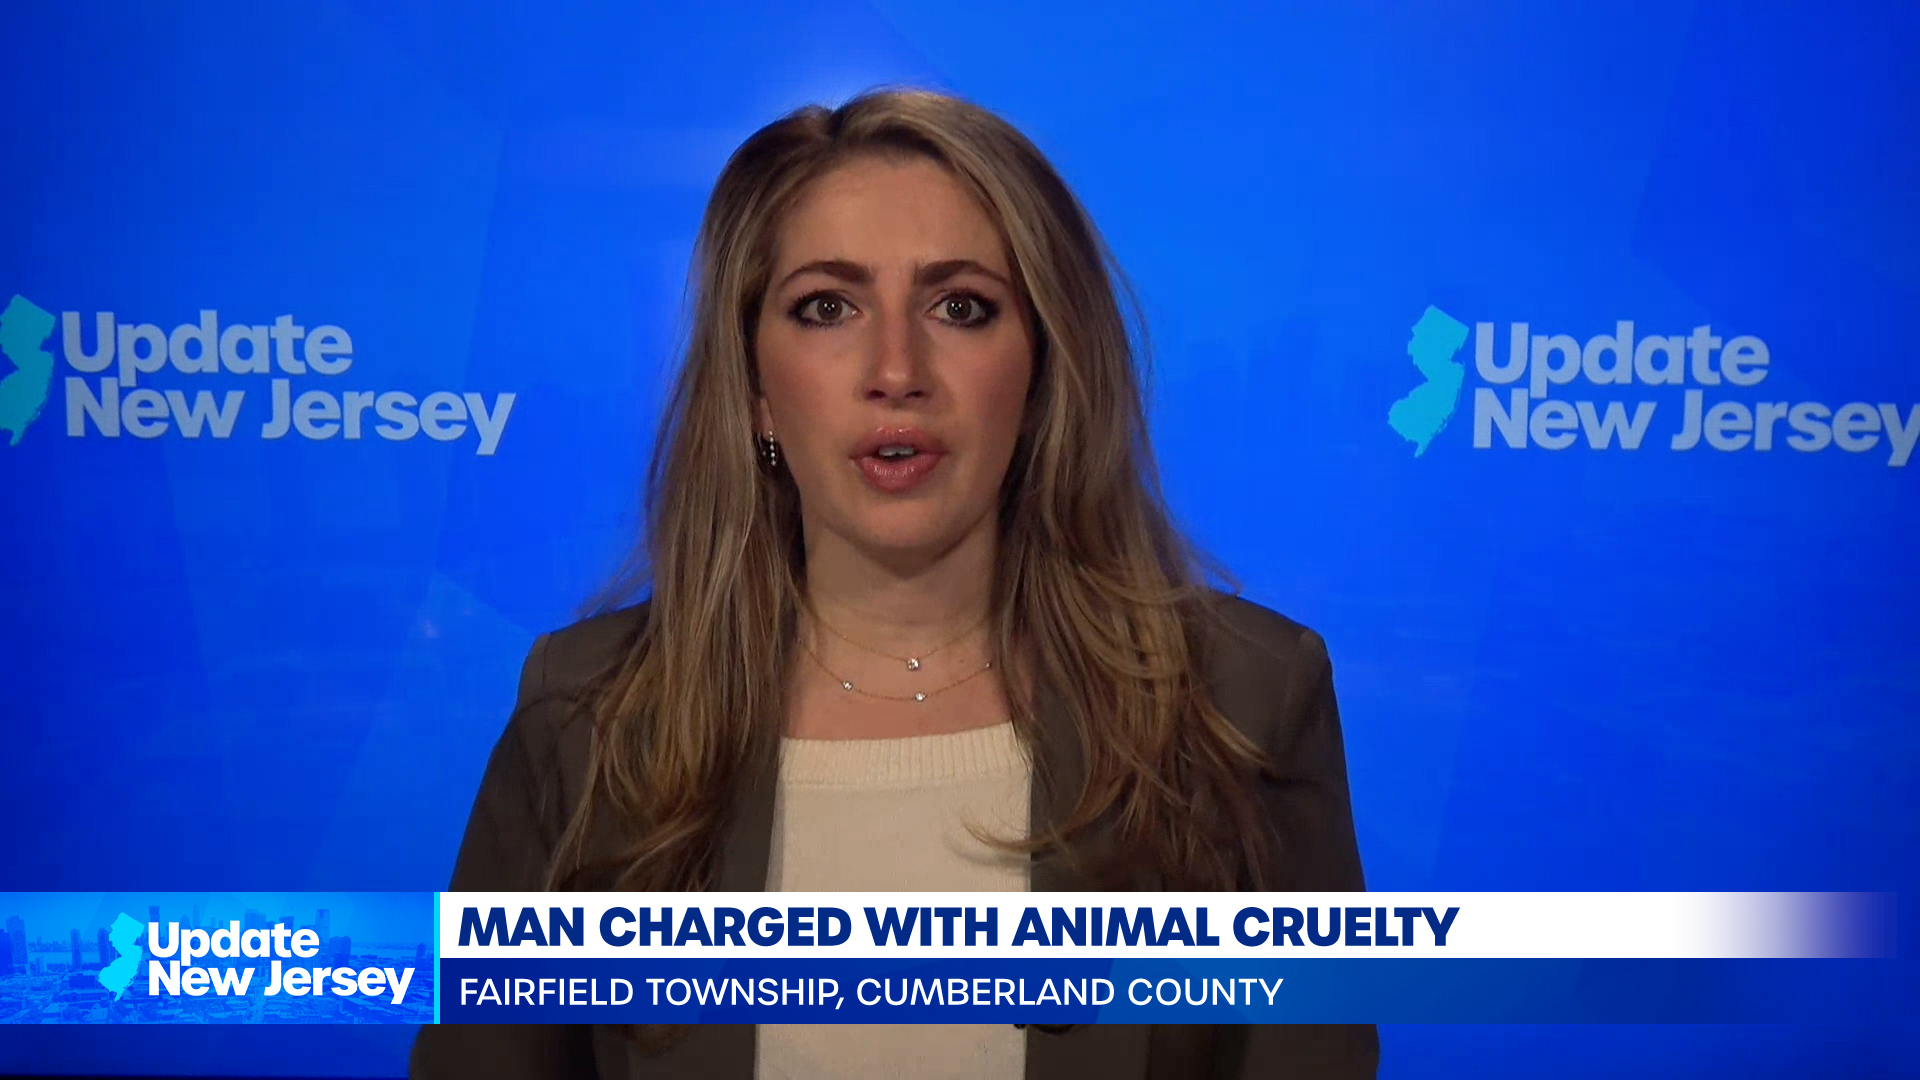 News Update: Man Charged or Animal Cruelty